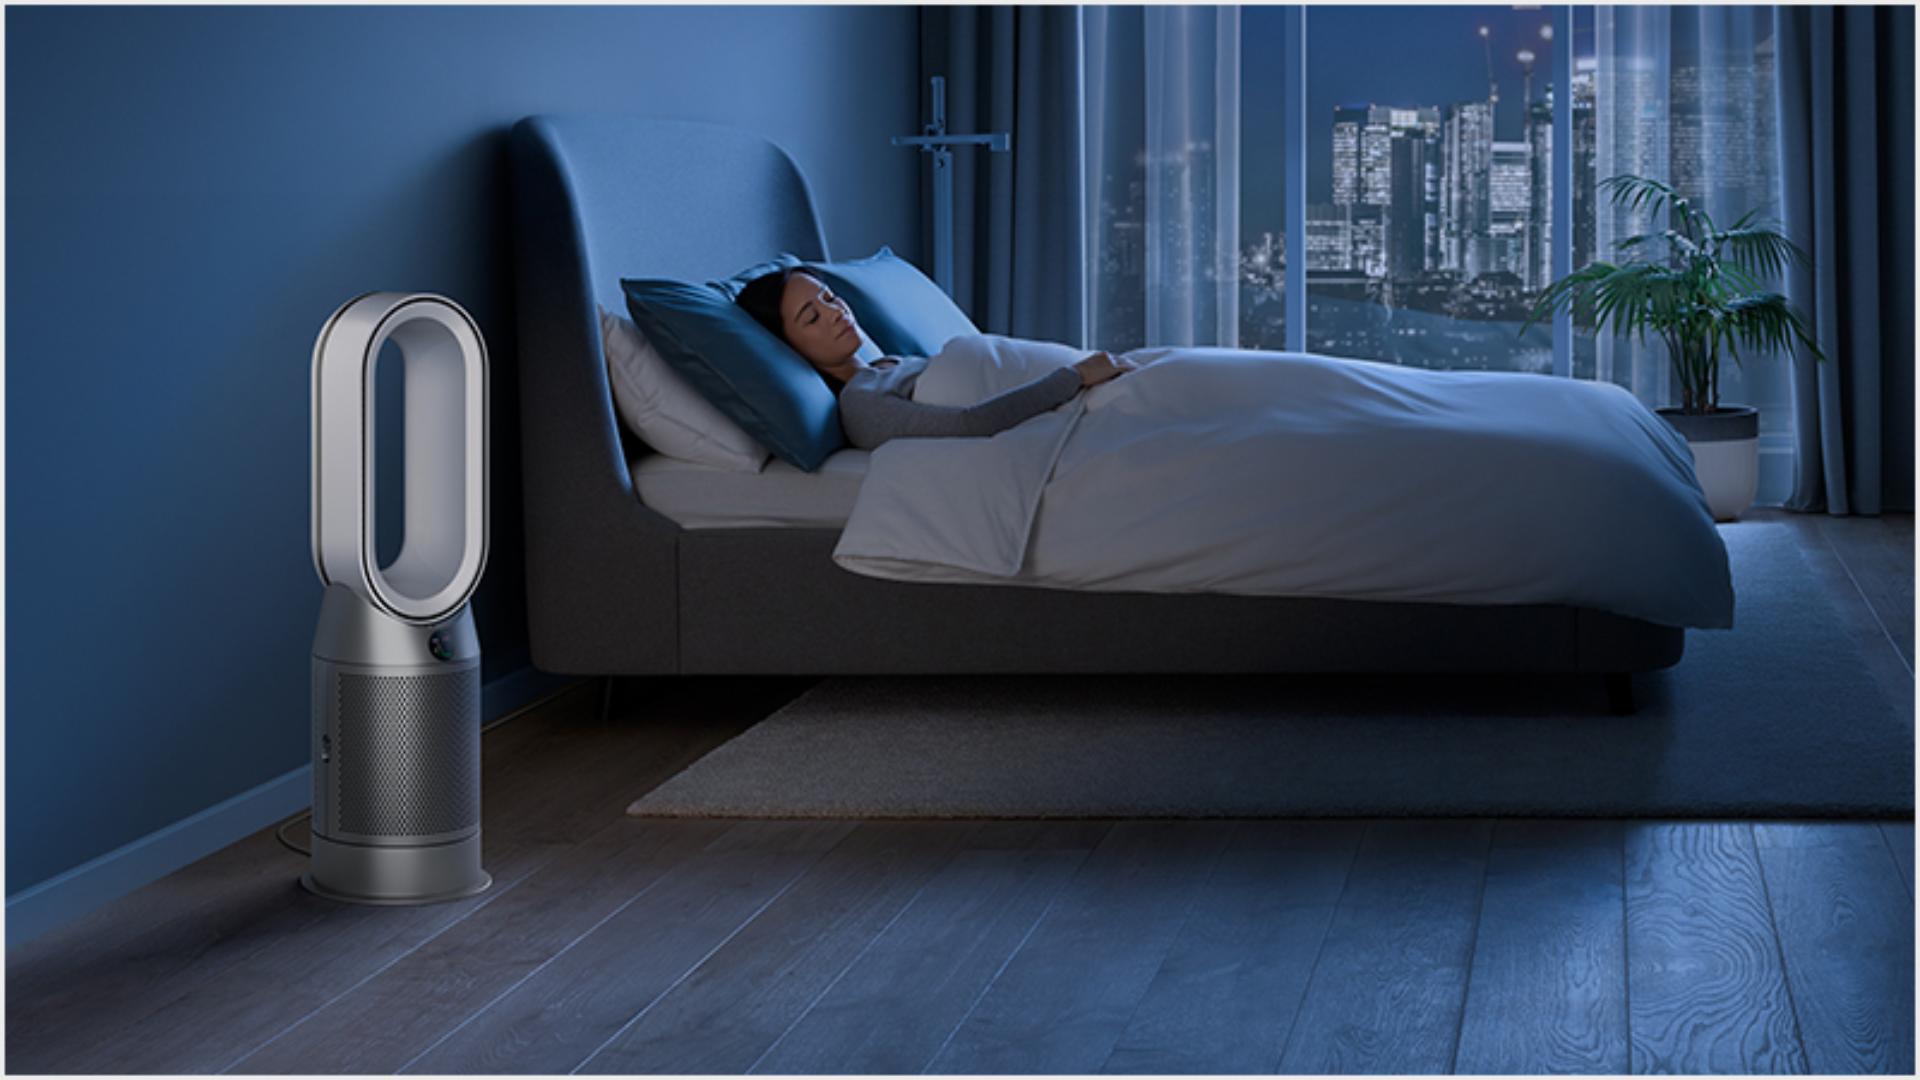 Someone sleeping peacefully in a hotel room purified by a Dyson purifier